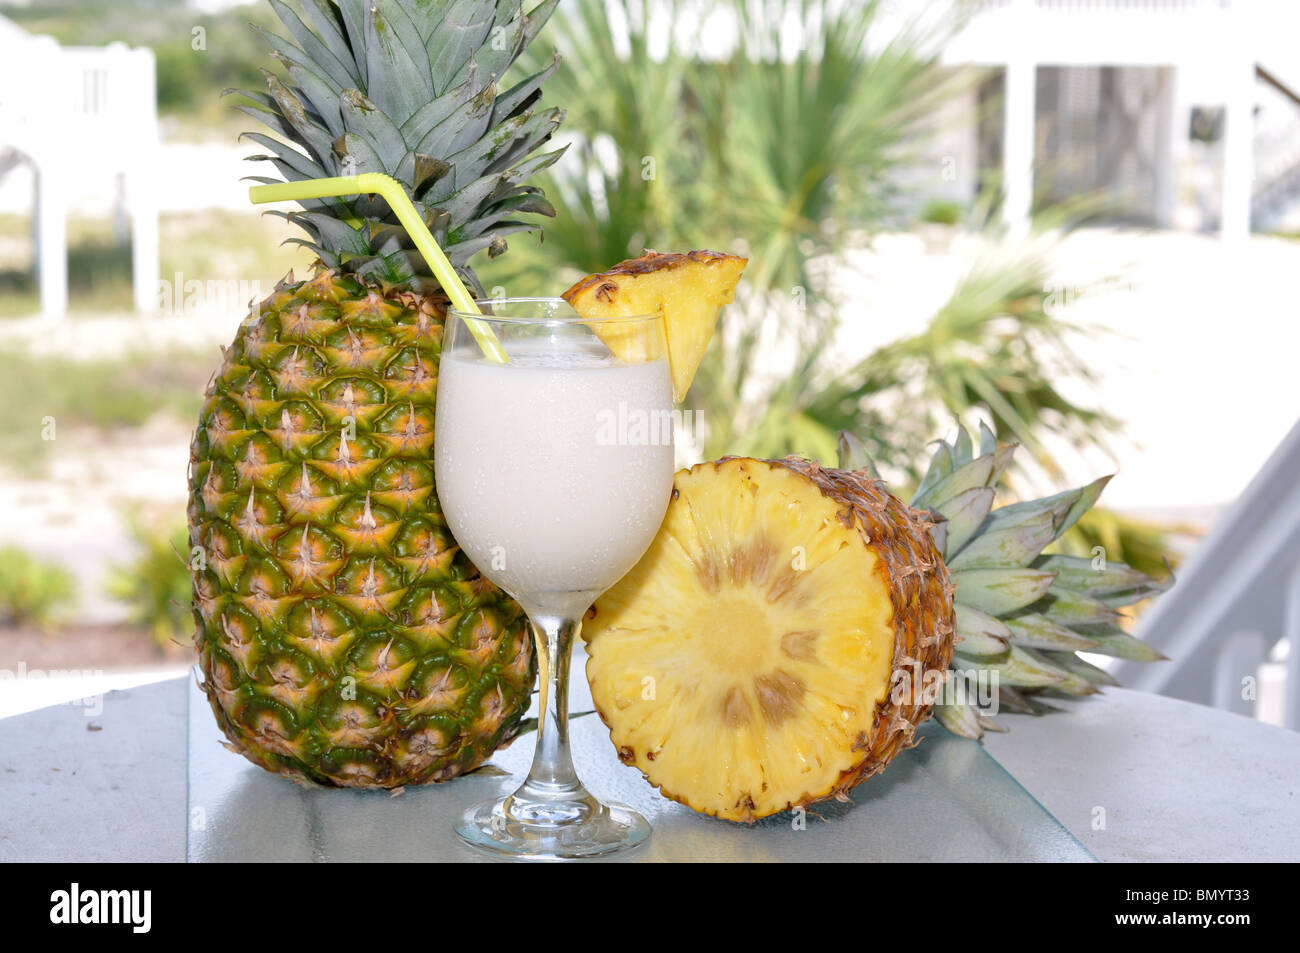 Pina Colada on table with whole and half pineapple. Garnish and straw in glass. Stock Photo